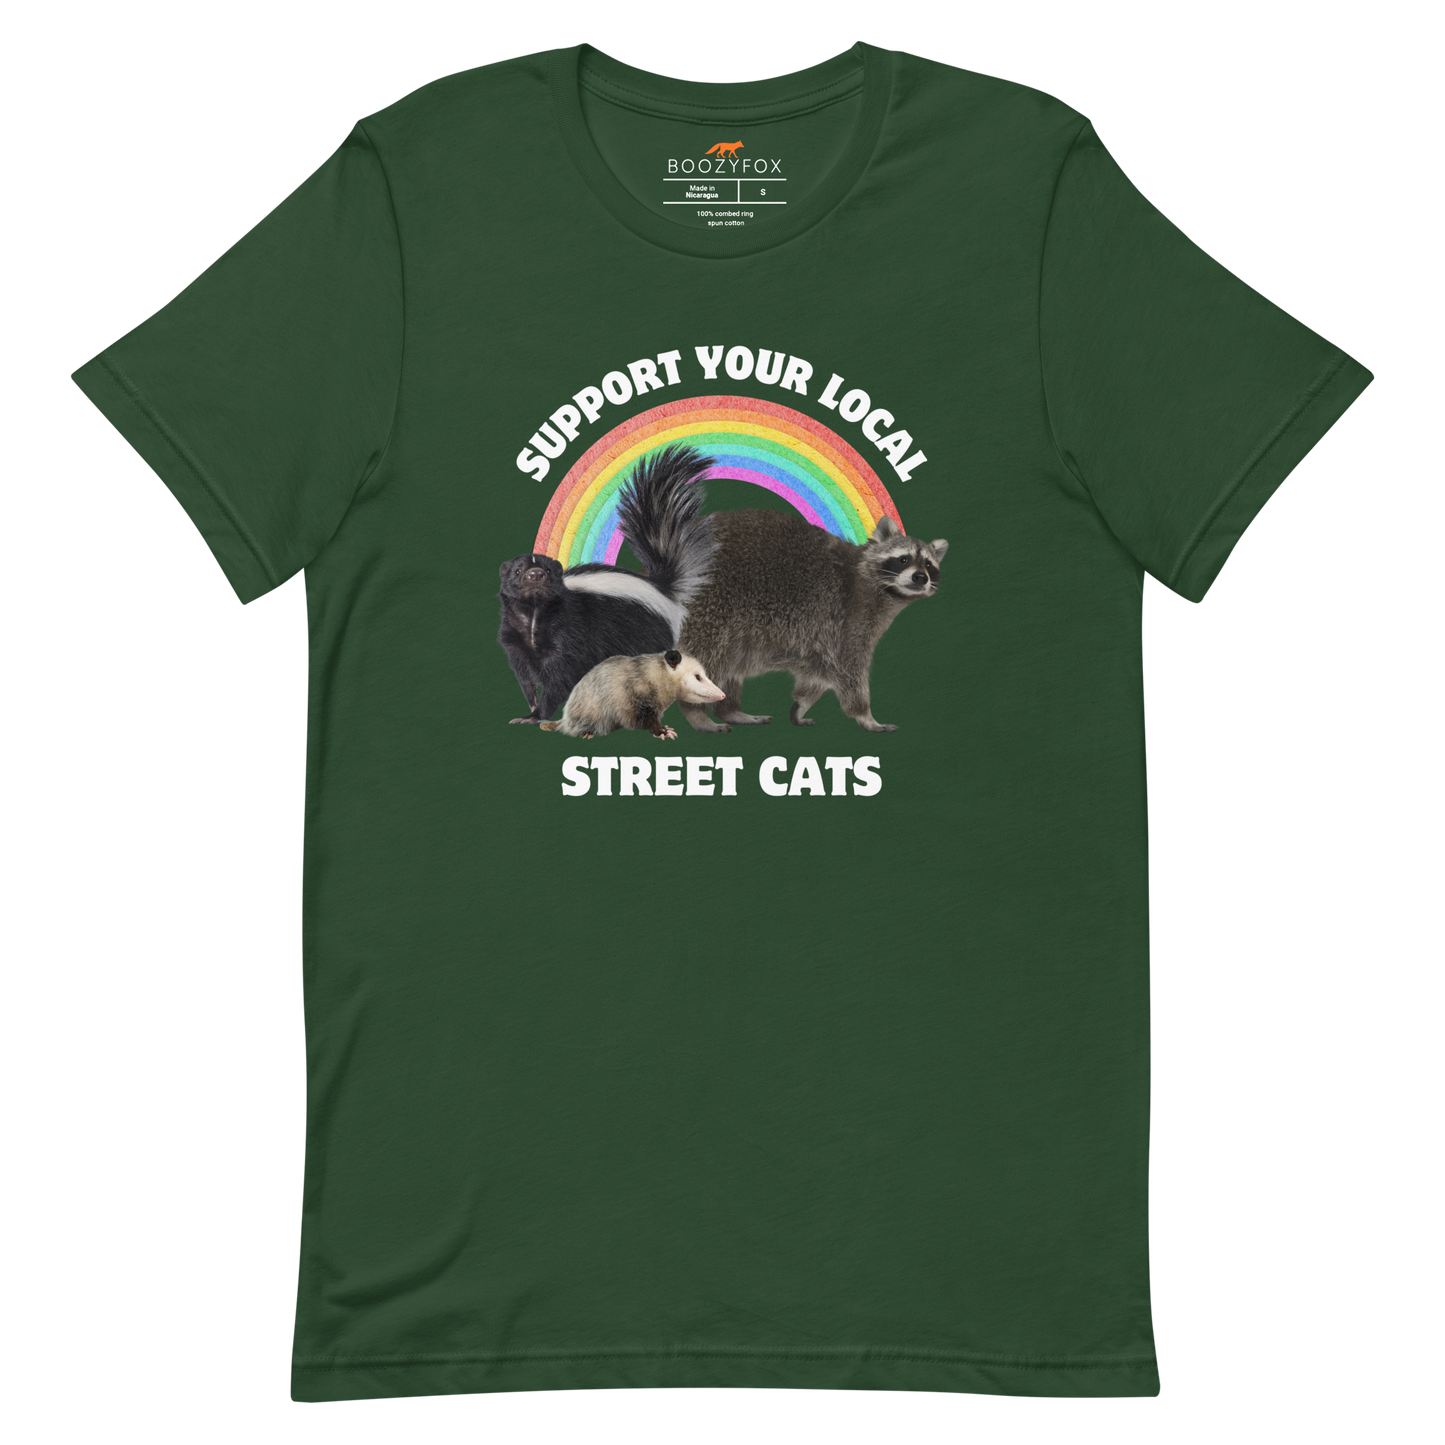 Forest Green Premium Street Cats Tee featuring a funny 'Support Your Local Street Cats' graphic on the chest - Funny Graphic Animal Tees - Boozy Fox